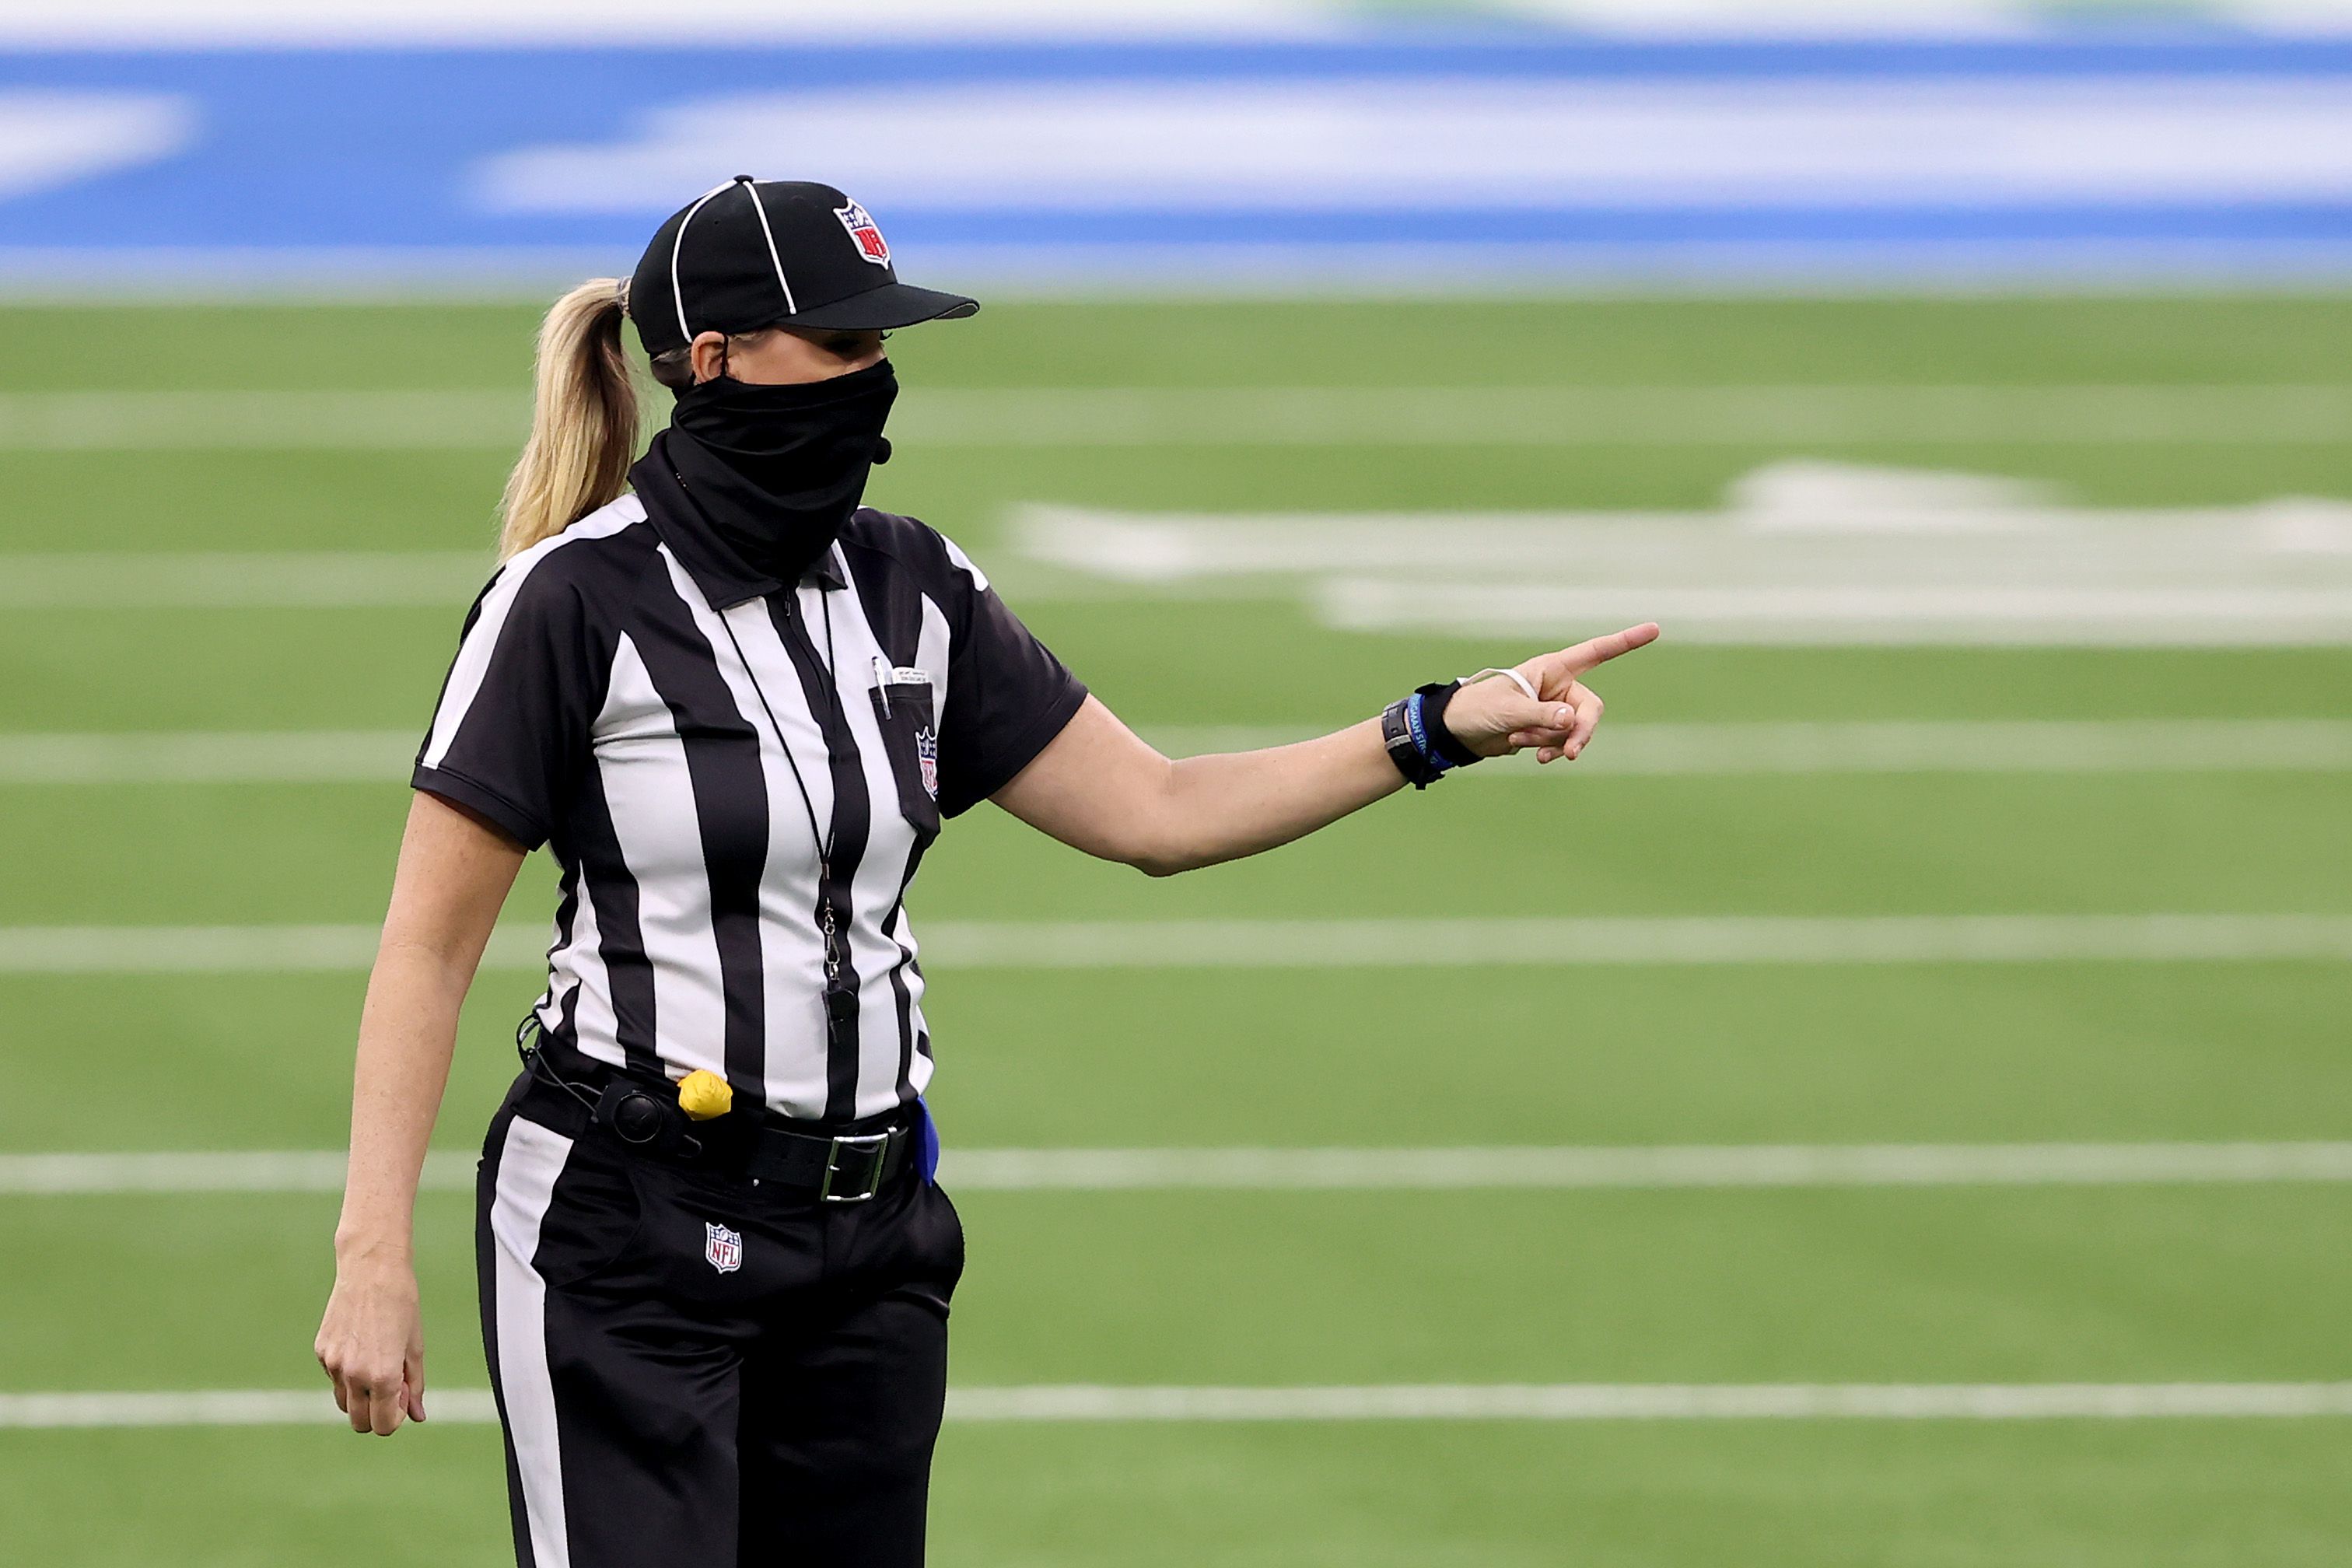 nfl official clothing